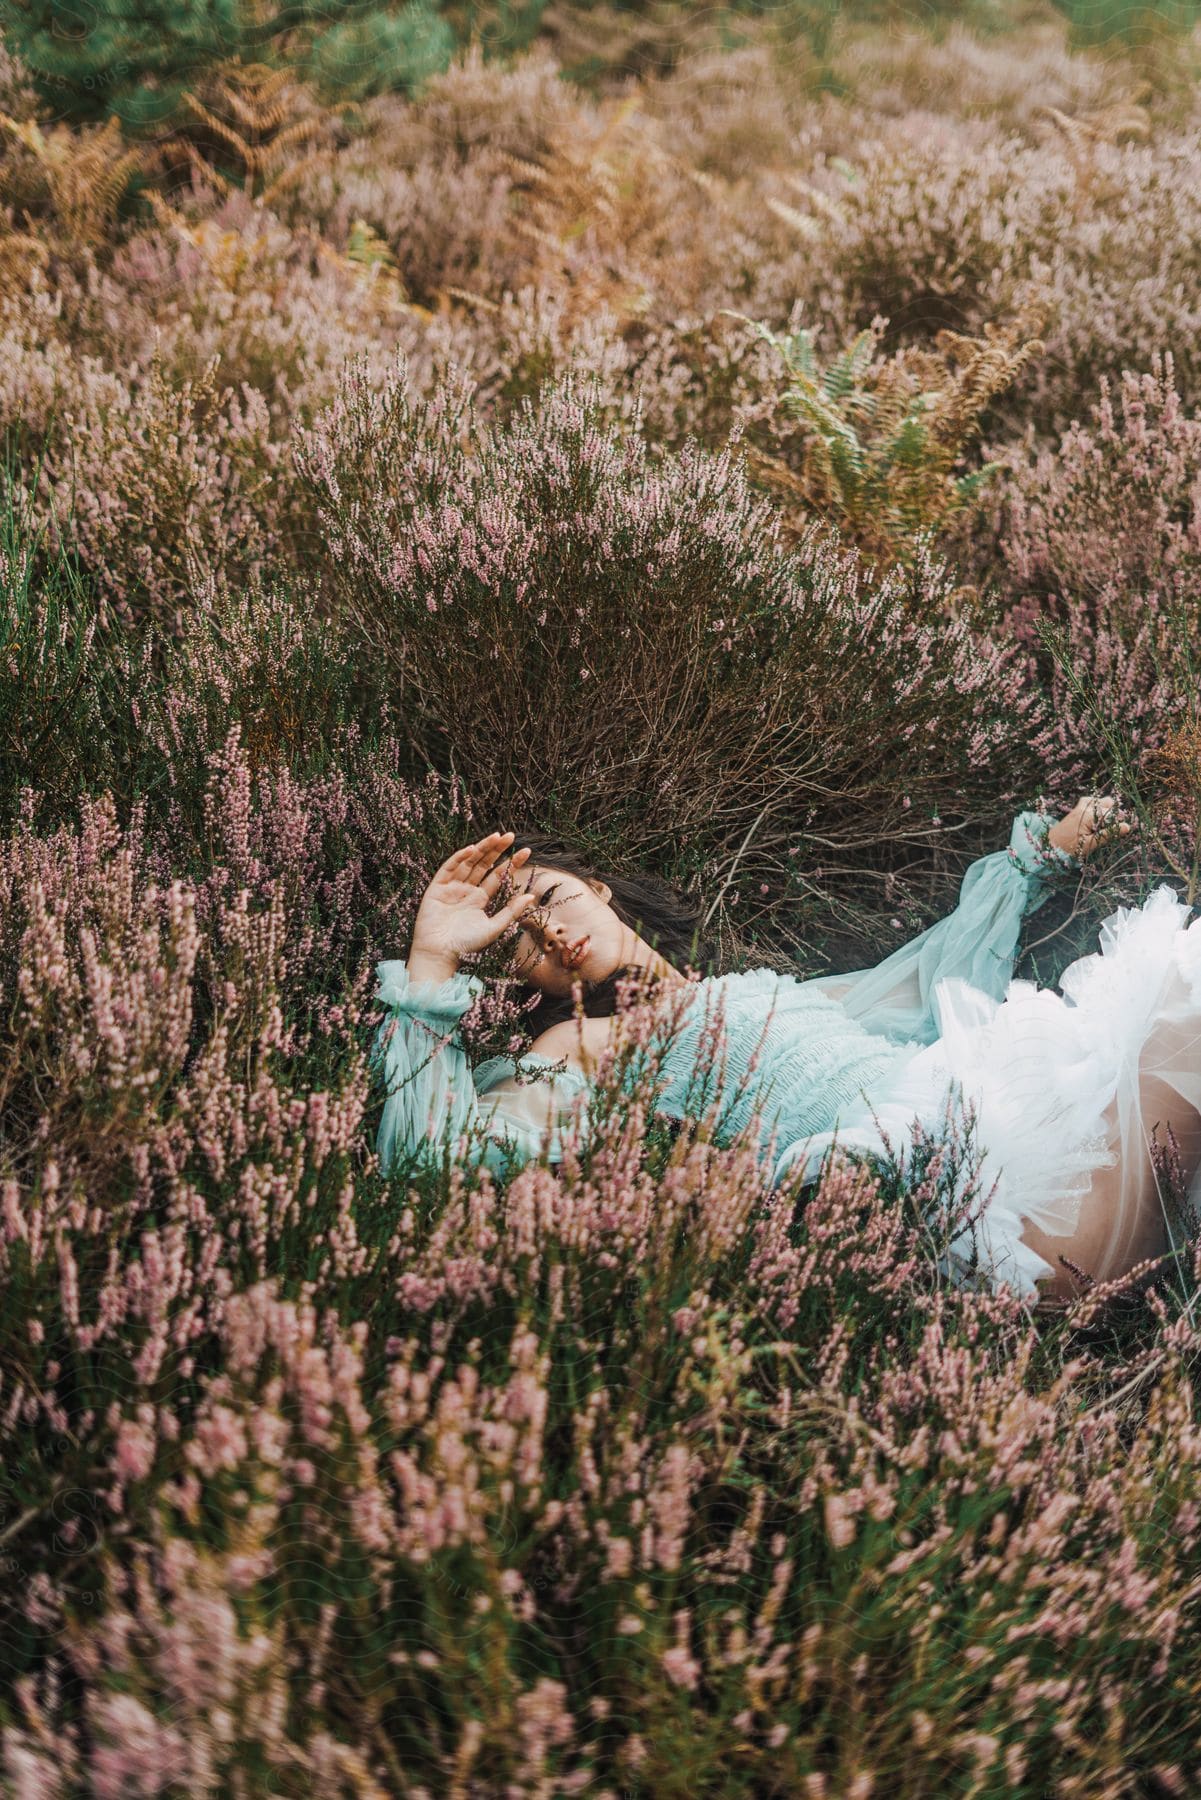 Sun shines upon a woman lying in a field of plants and flowers as she holds her hand in front of her face